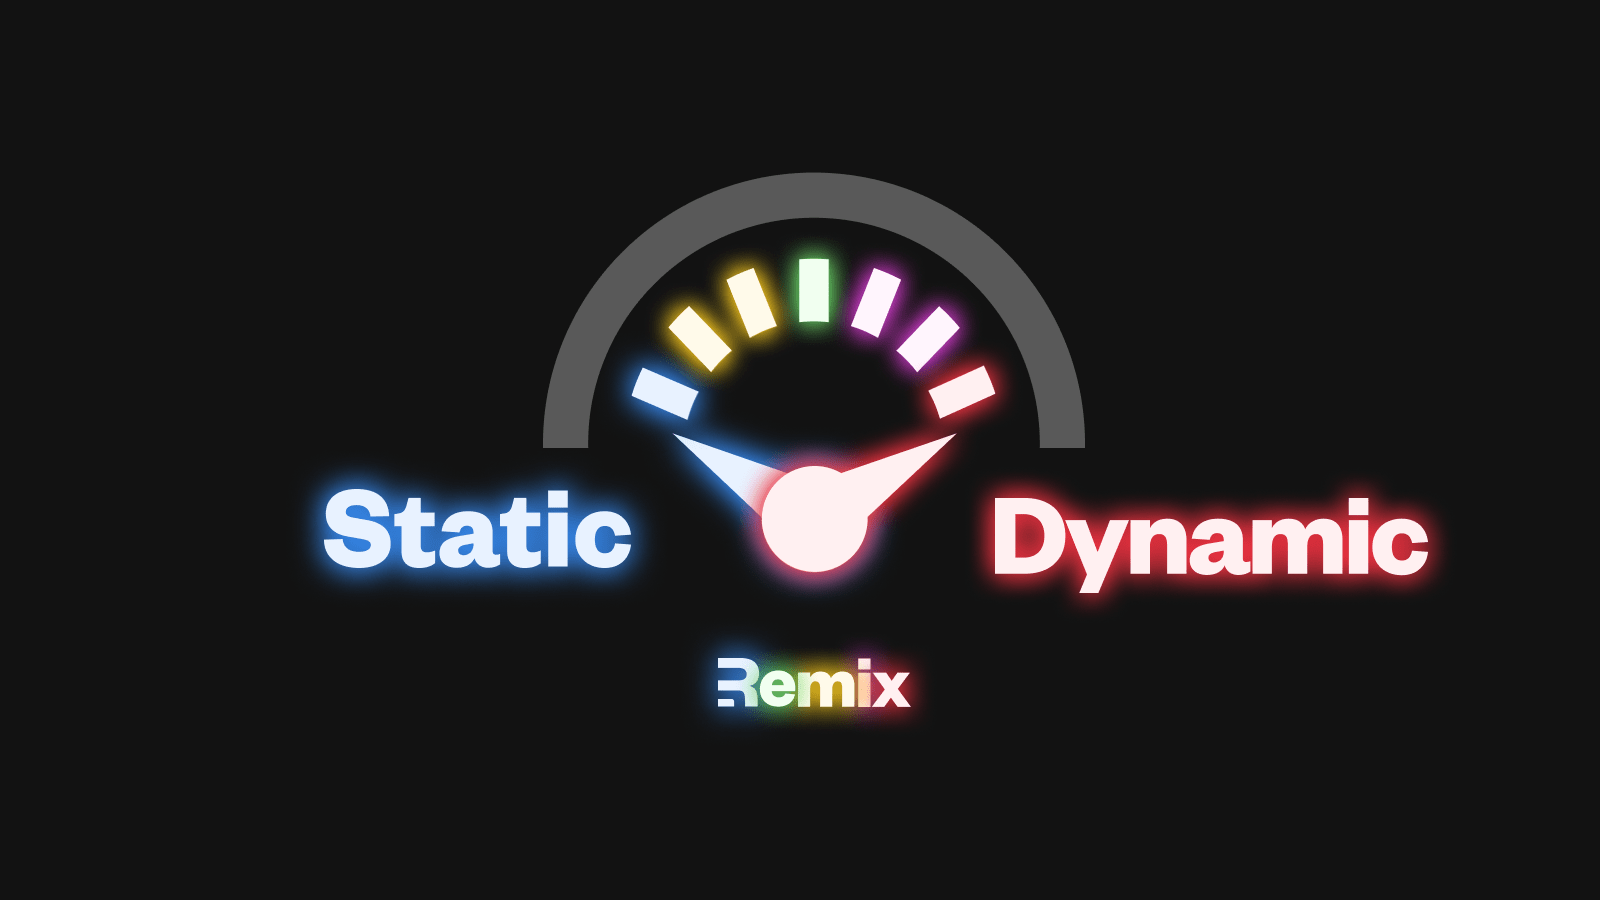 An illustration of a gauge with a dial that can go from “Static” on the left to “Dynamic” on the right, accompanied by the Remix logo.